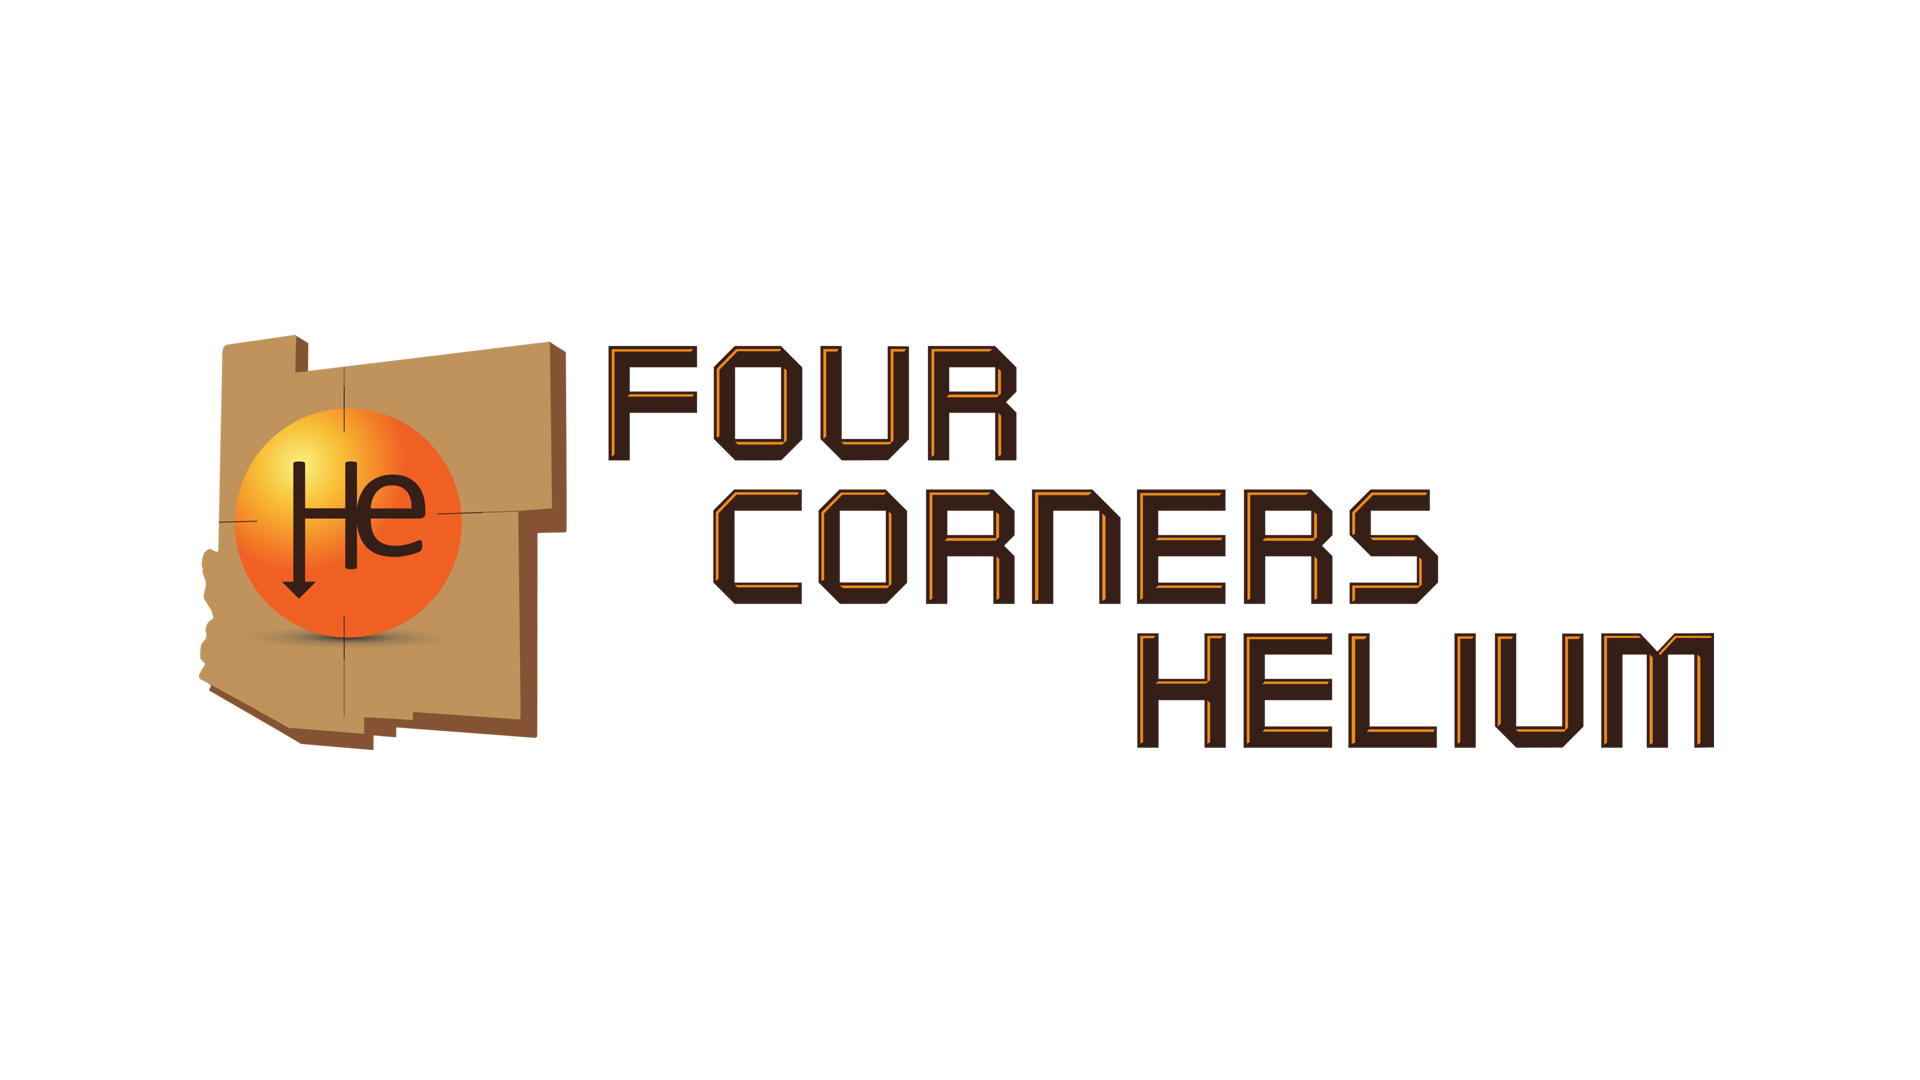 Four Corners Helium: Advancing the discovery of helium reservoirs